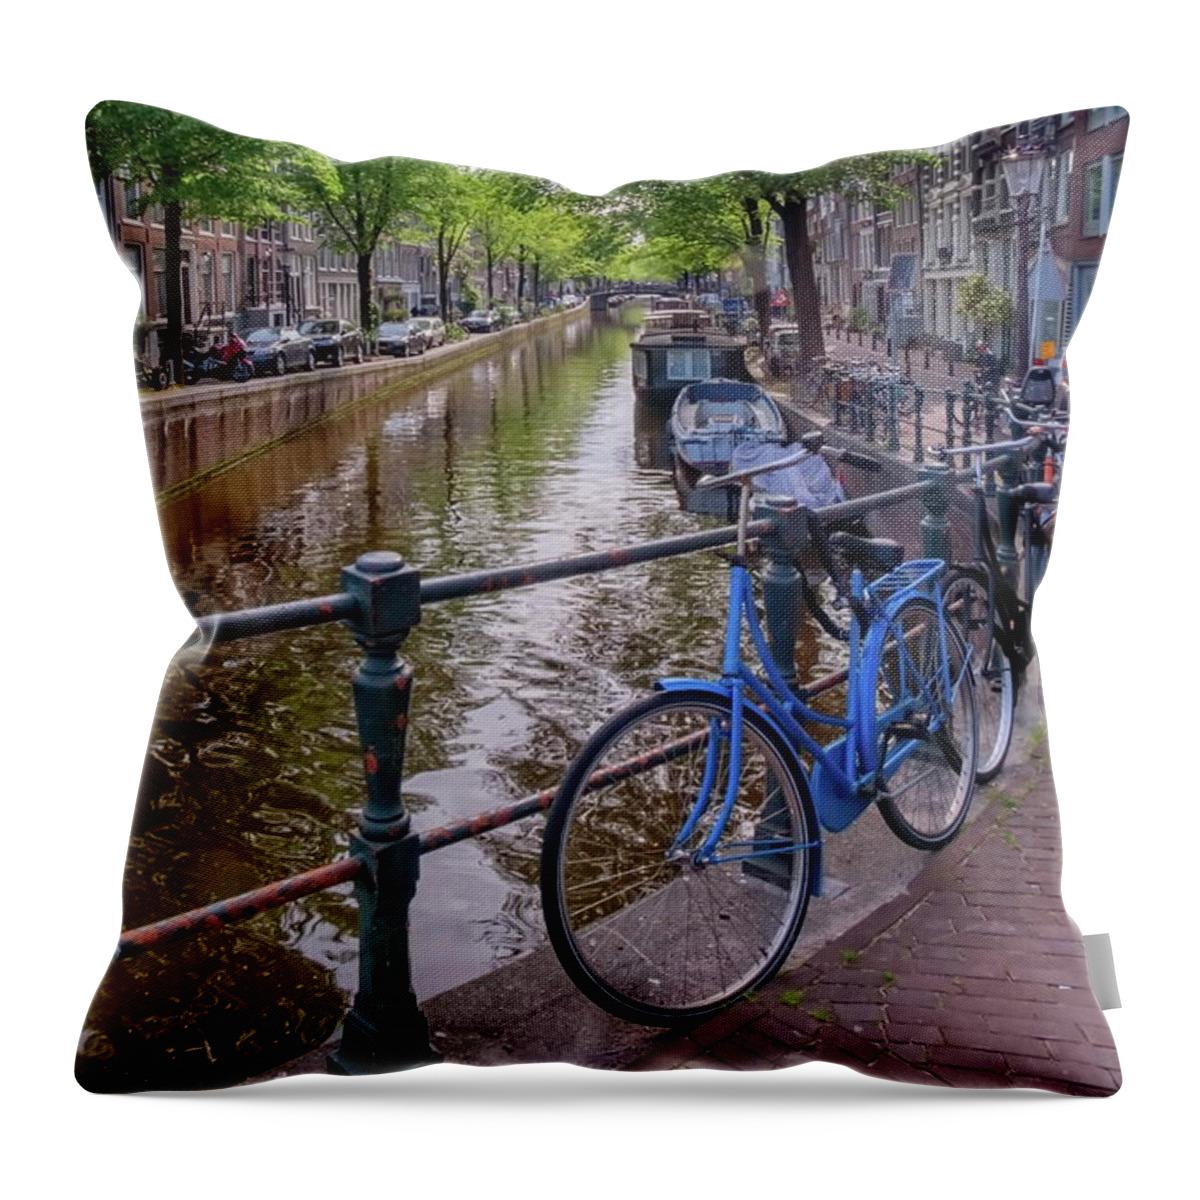 Travel Throw Pillow featuring the photograph Typical buildings, canal and bikes in Amsterdam, Netherlands #4 by Elenarts - Elena Duvernay photo